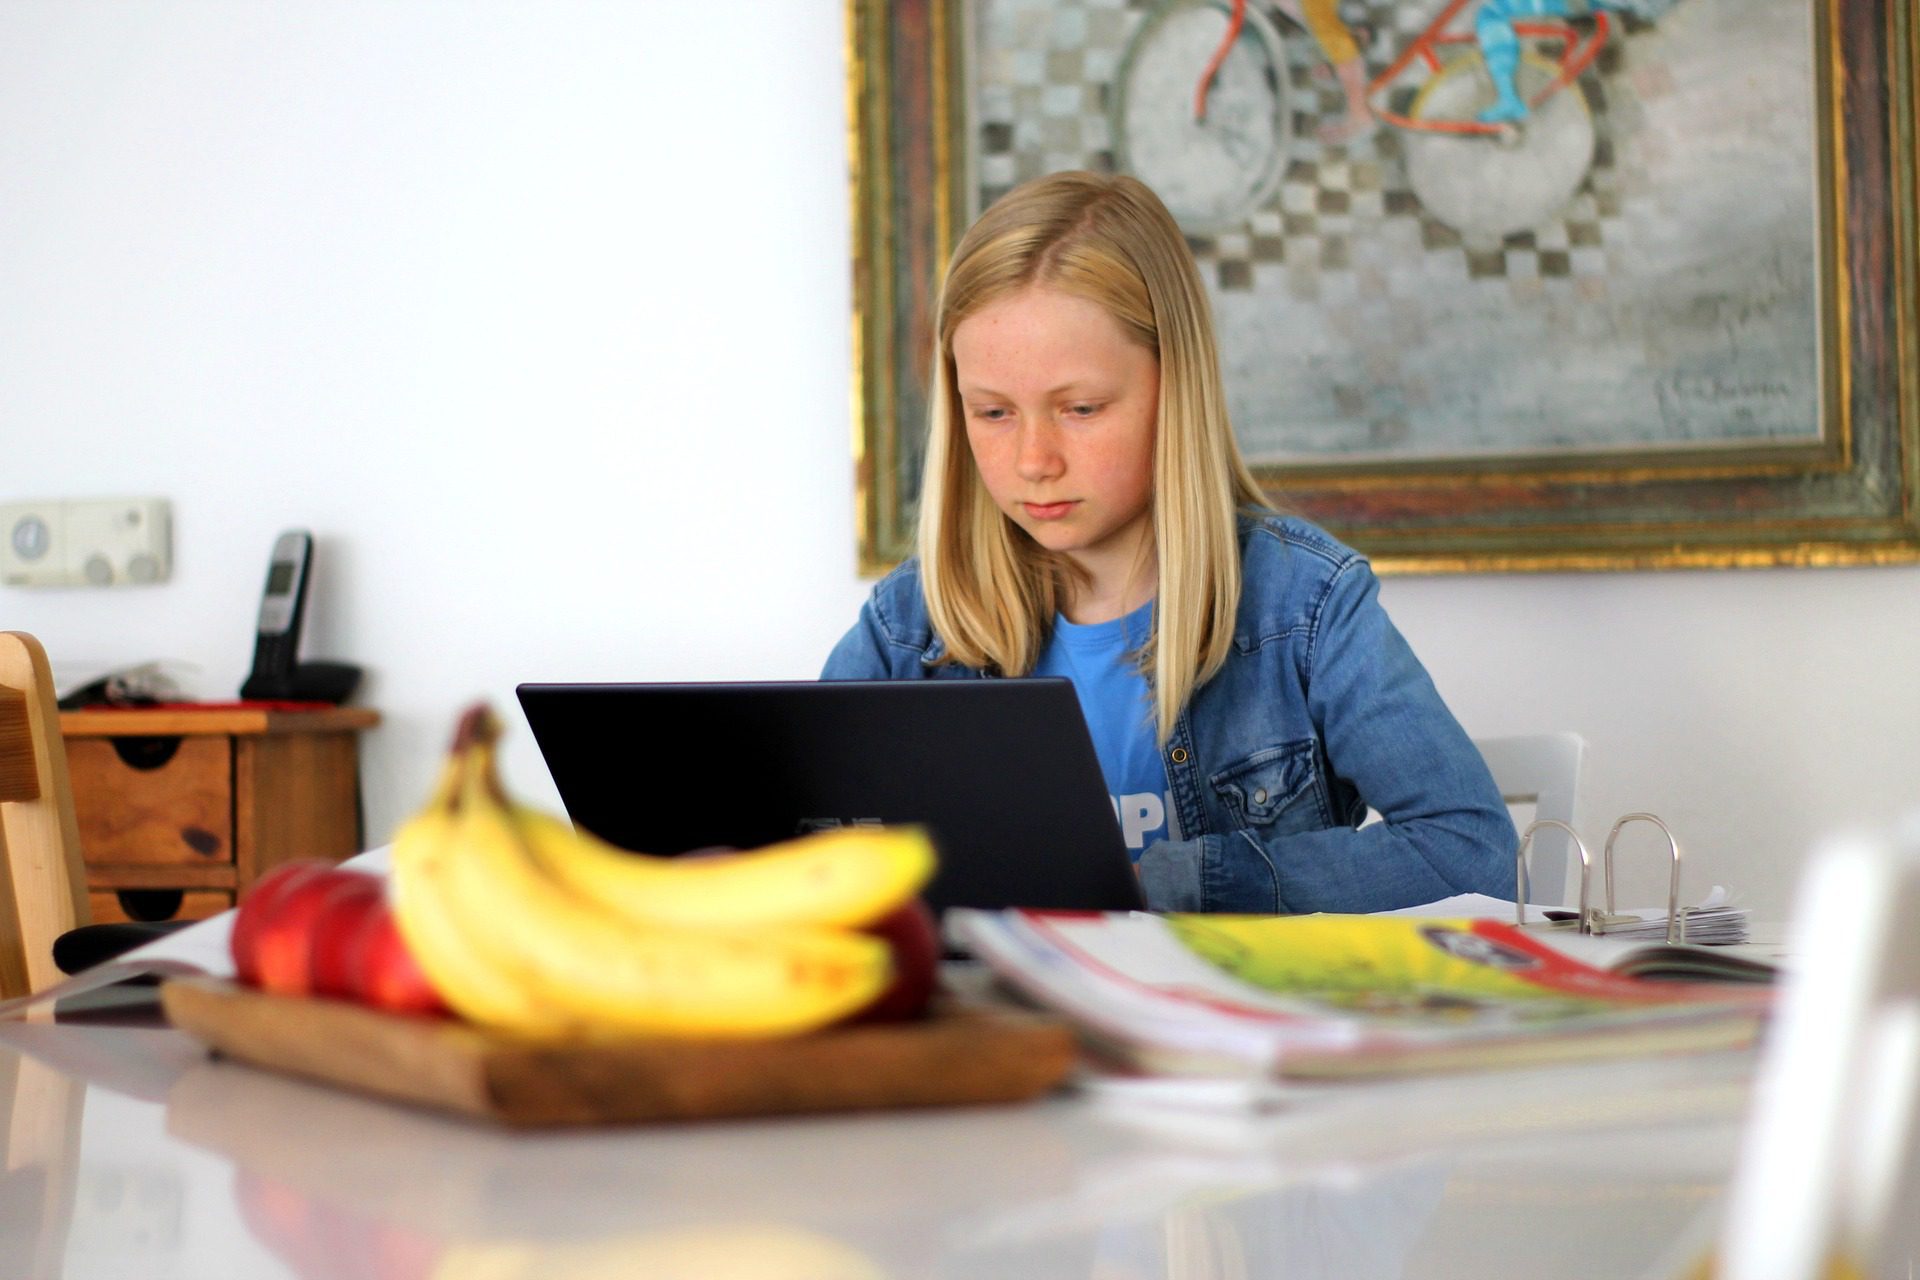 Young girl sat at a desk taking an eLearning course